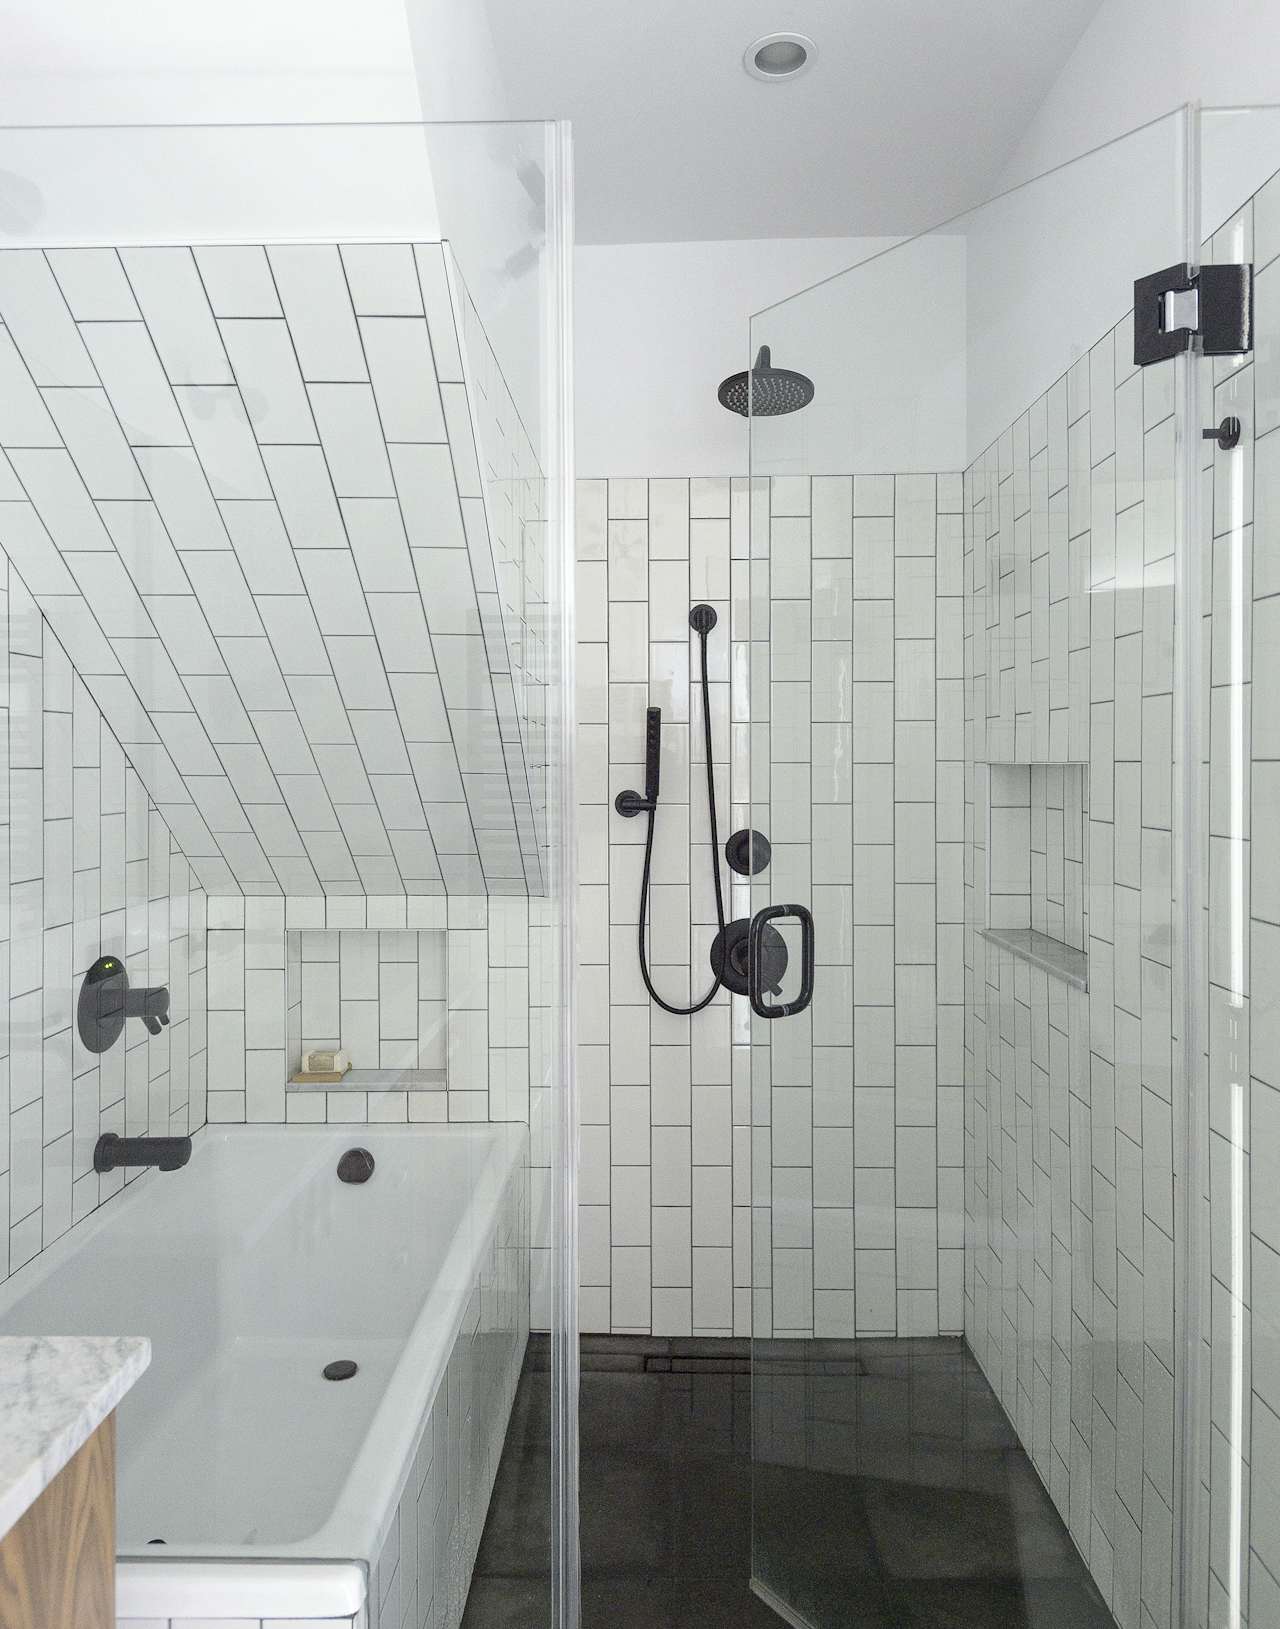 Photo 27 of 31 in Before & After: A Brooklyn Brownstone’s Dreary ...